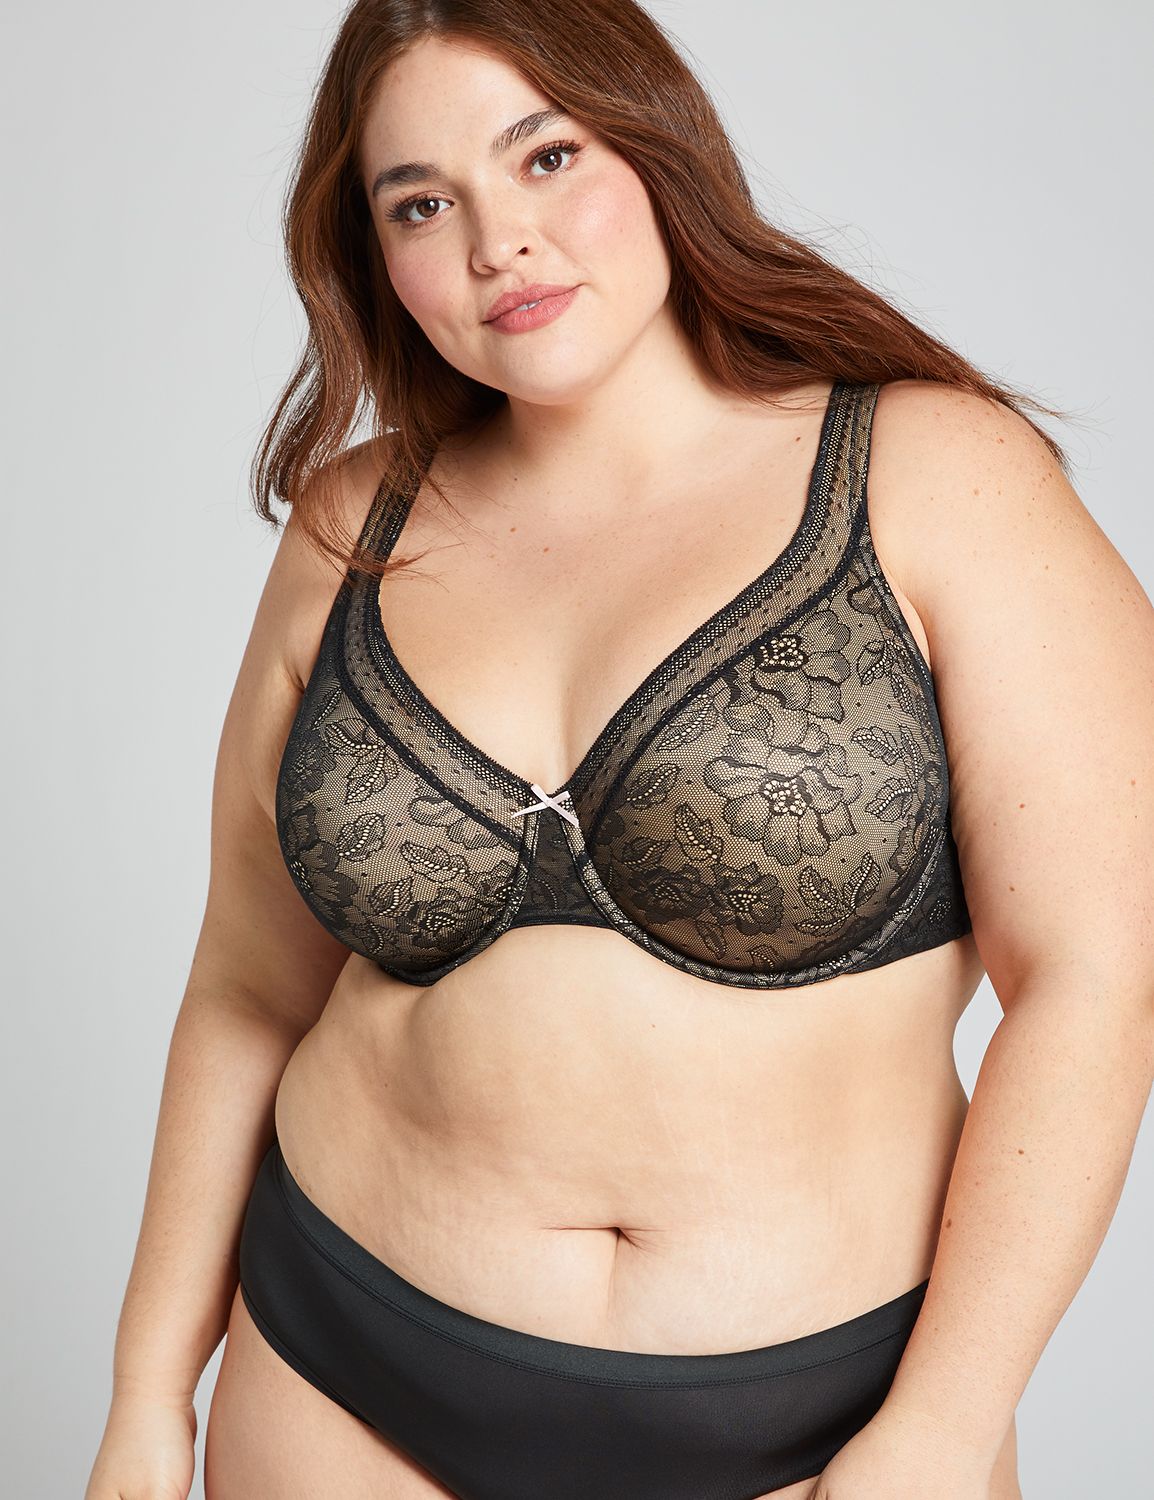 Cacique Modern Lace Covered LL BALC bra plus size 44D - $32 - From Iriana